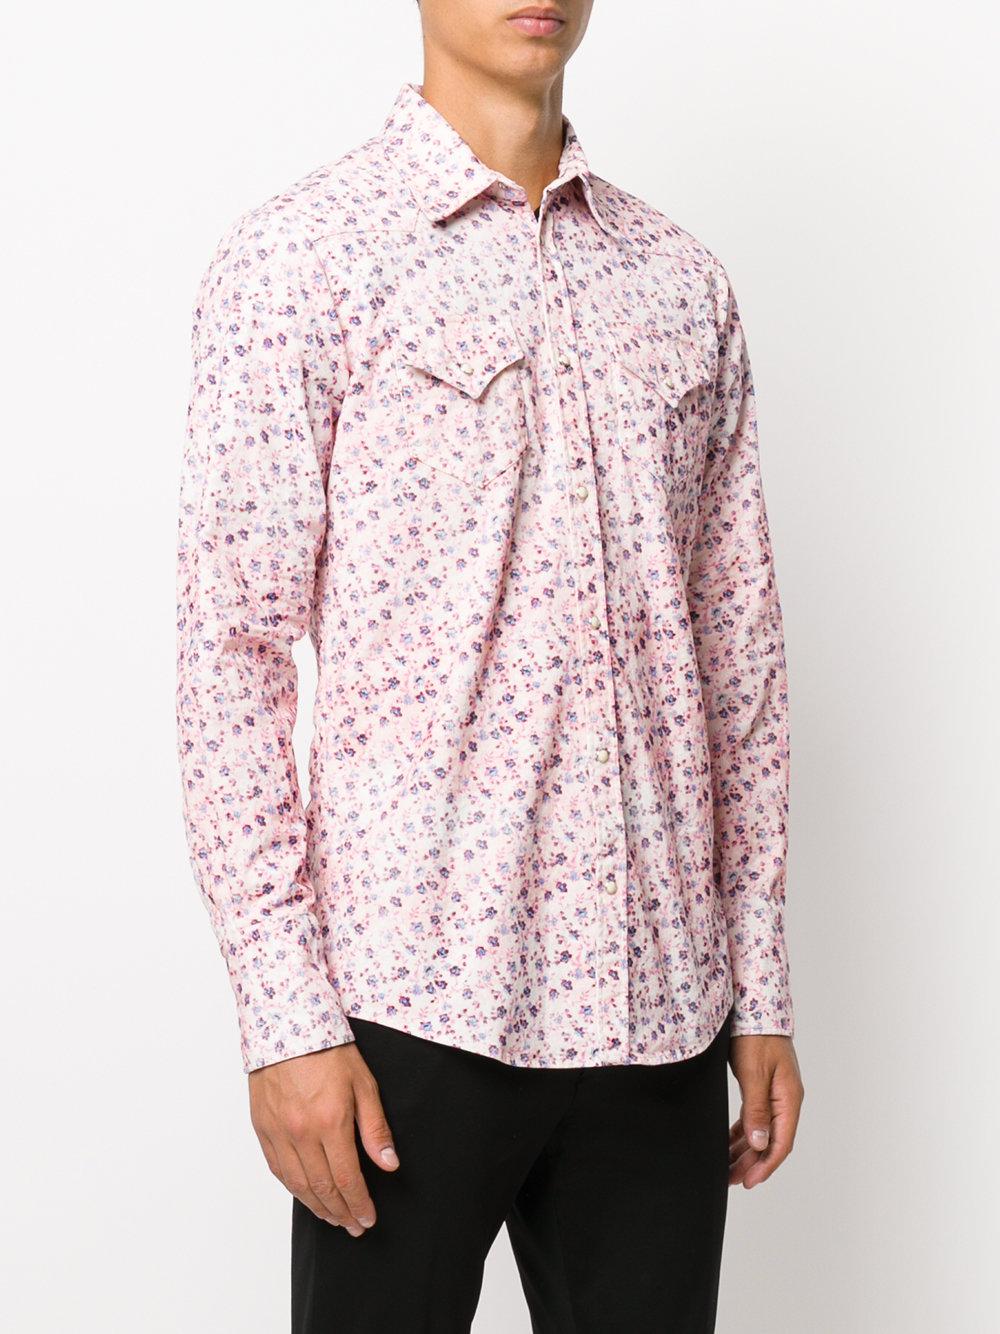 DSquared² Corduroy Floral Print Shirt in Pink & Purple ...